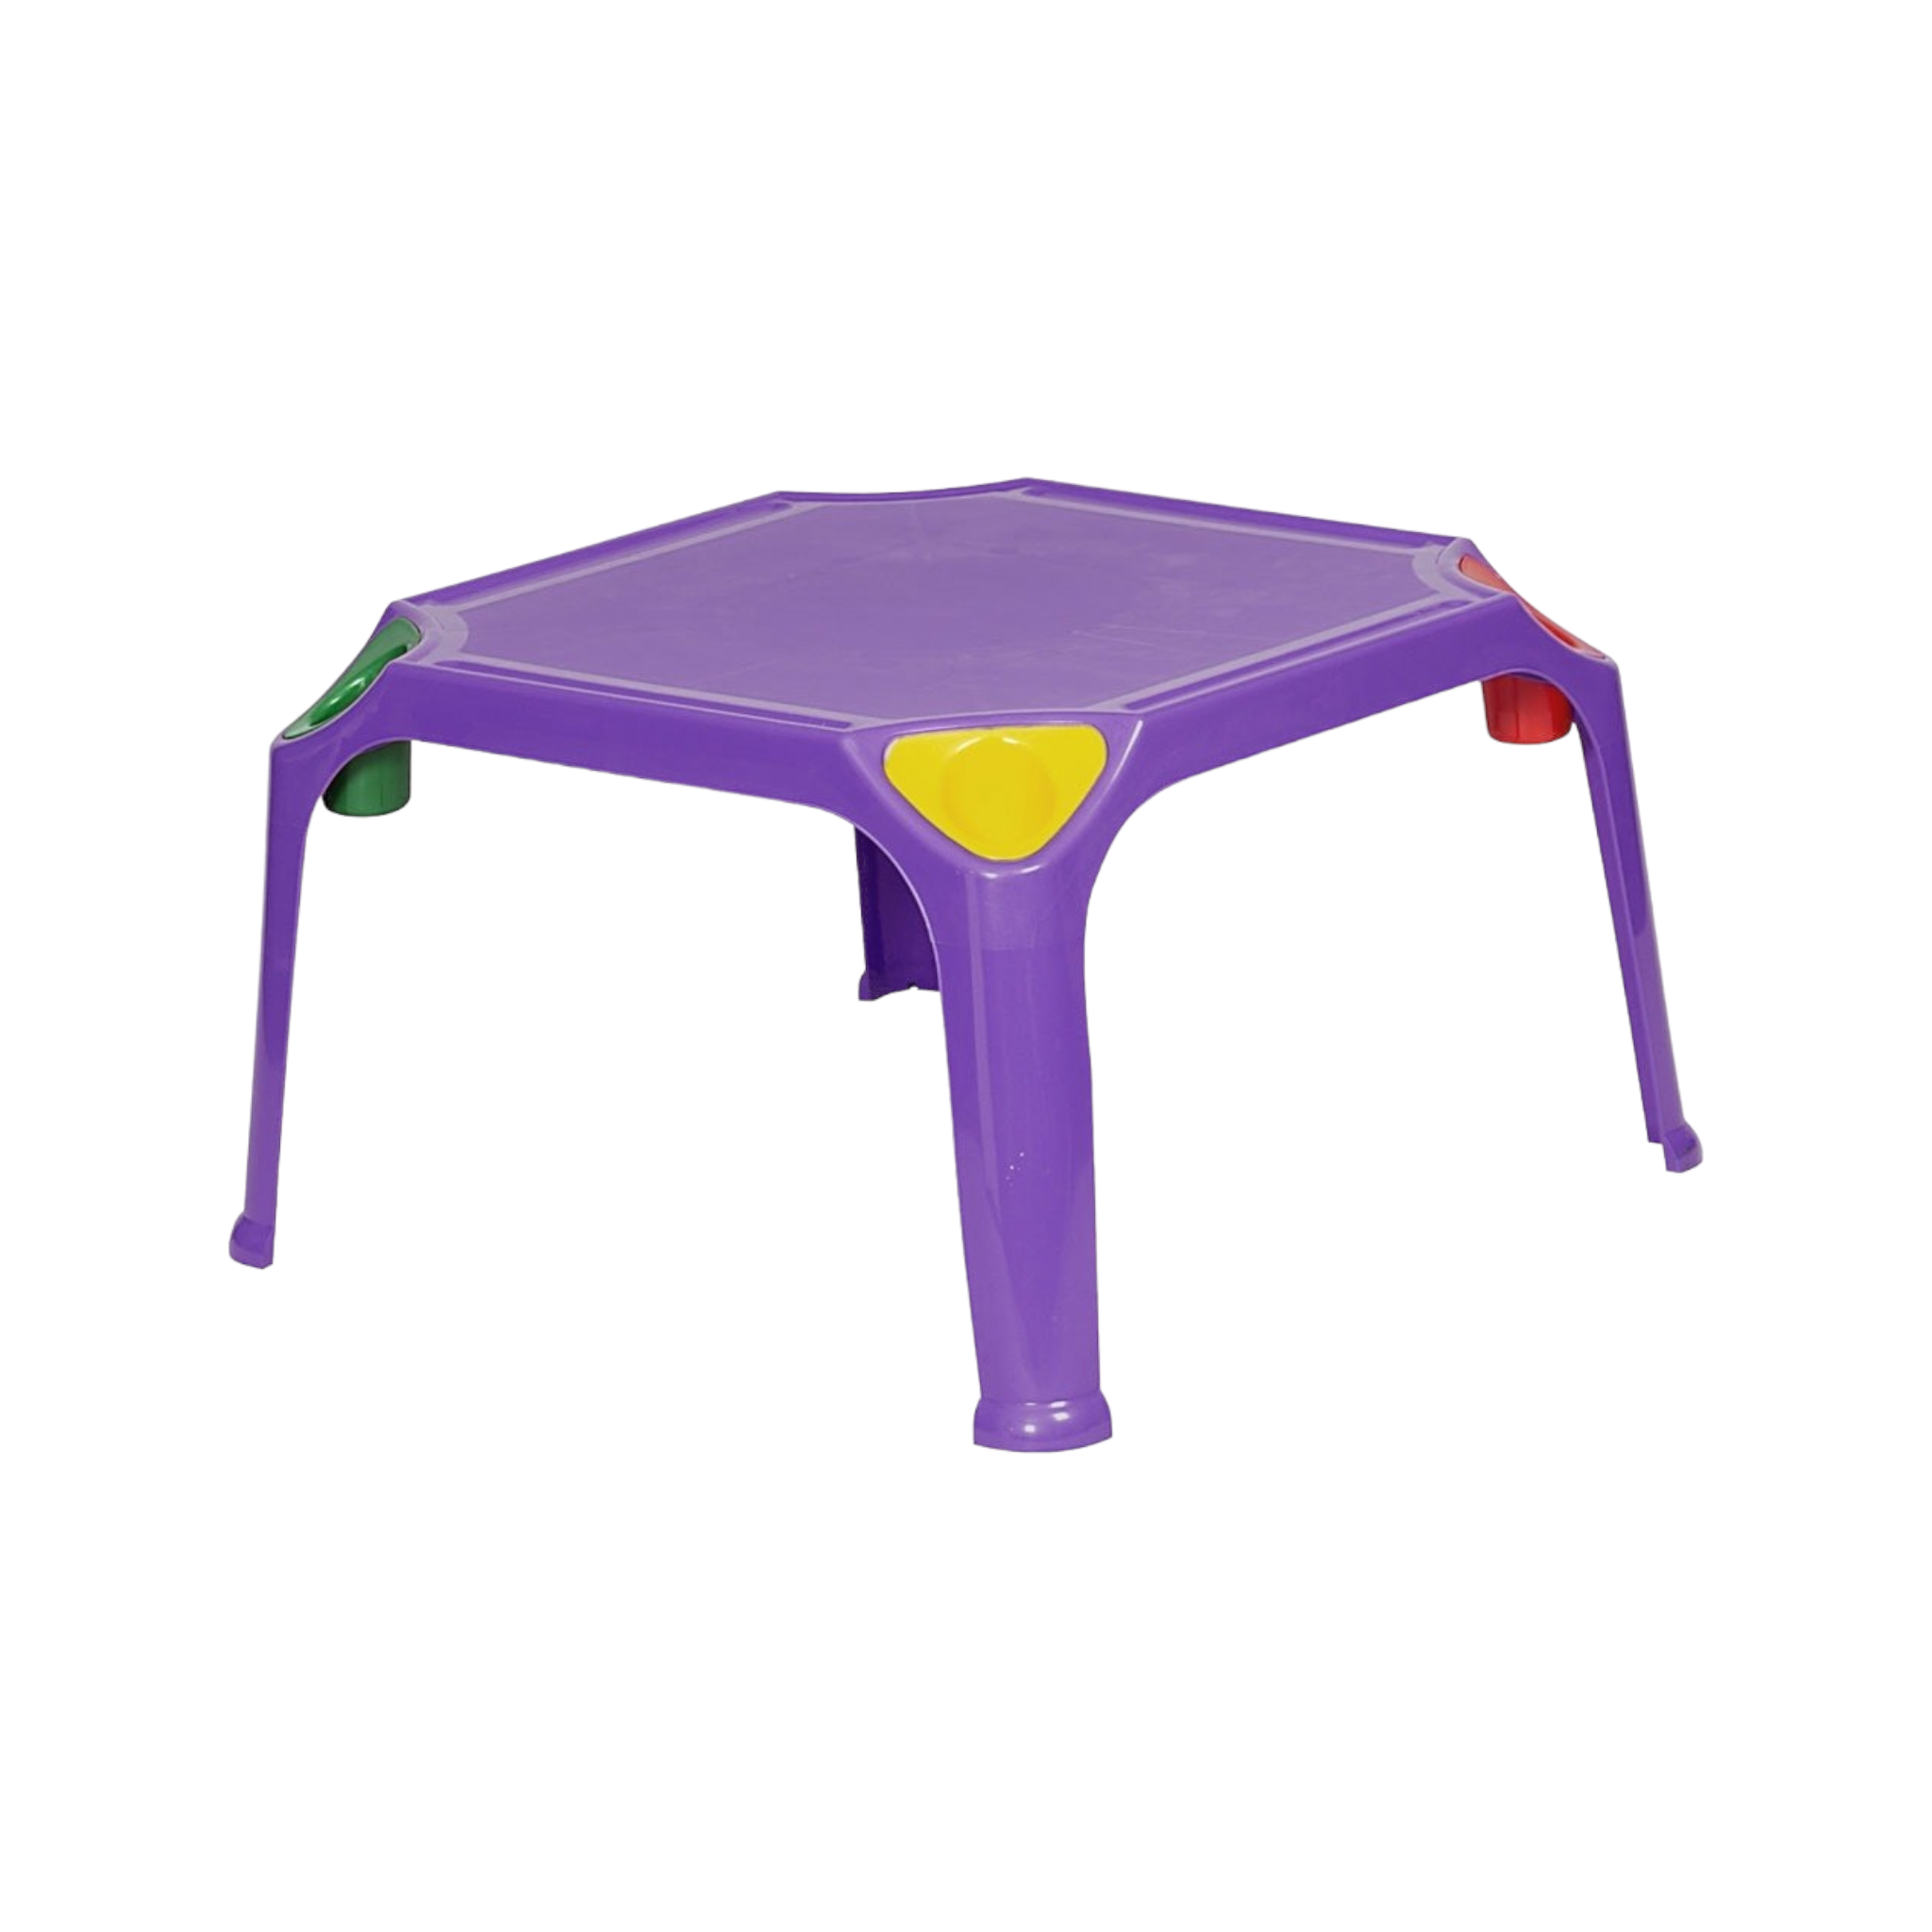 Kiddies Plastic Table With 4 Side Pencil Holder Buzz Kids